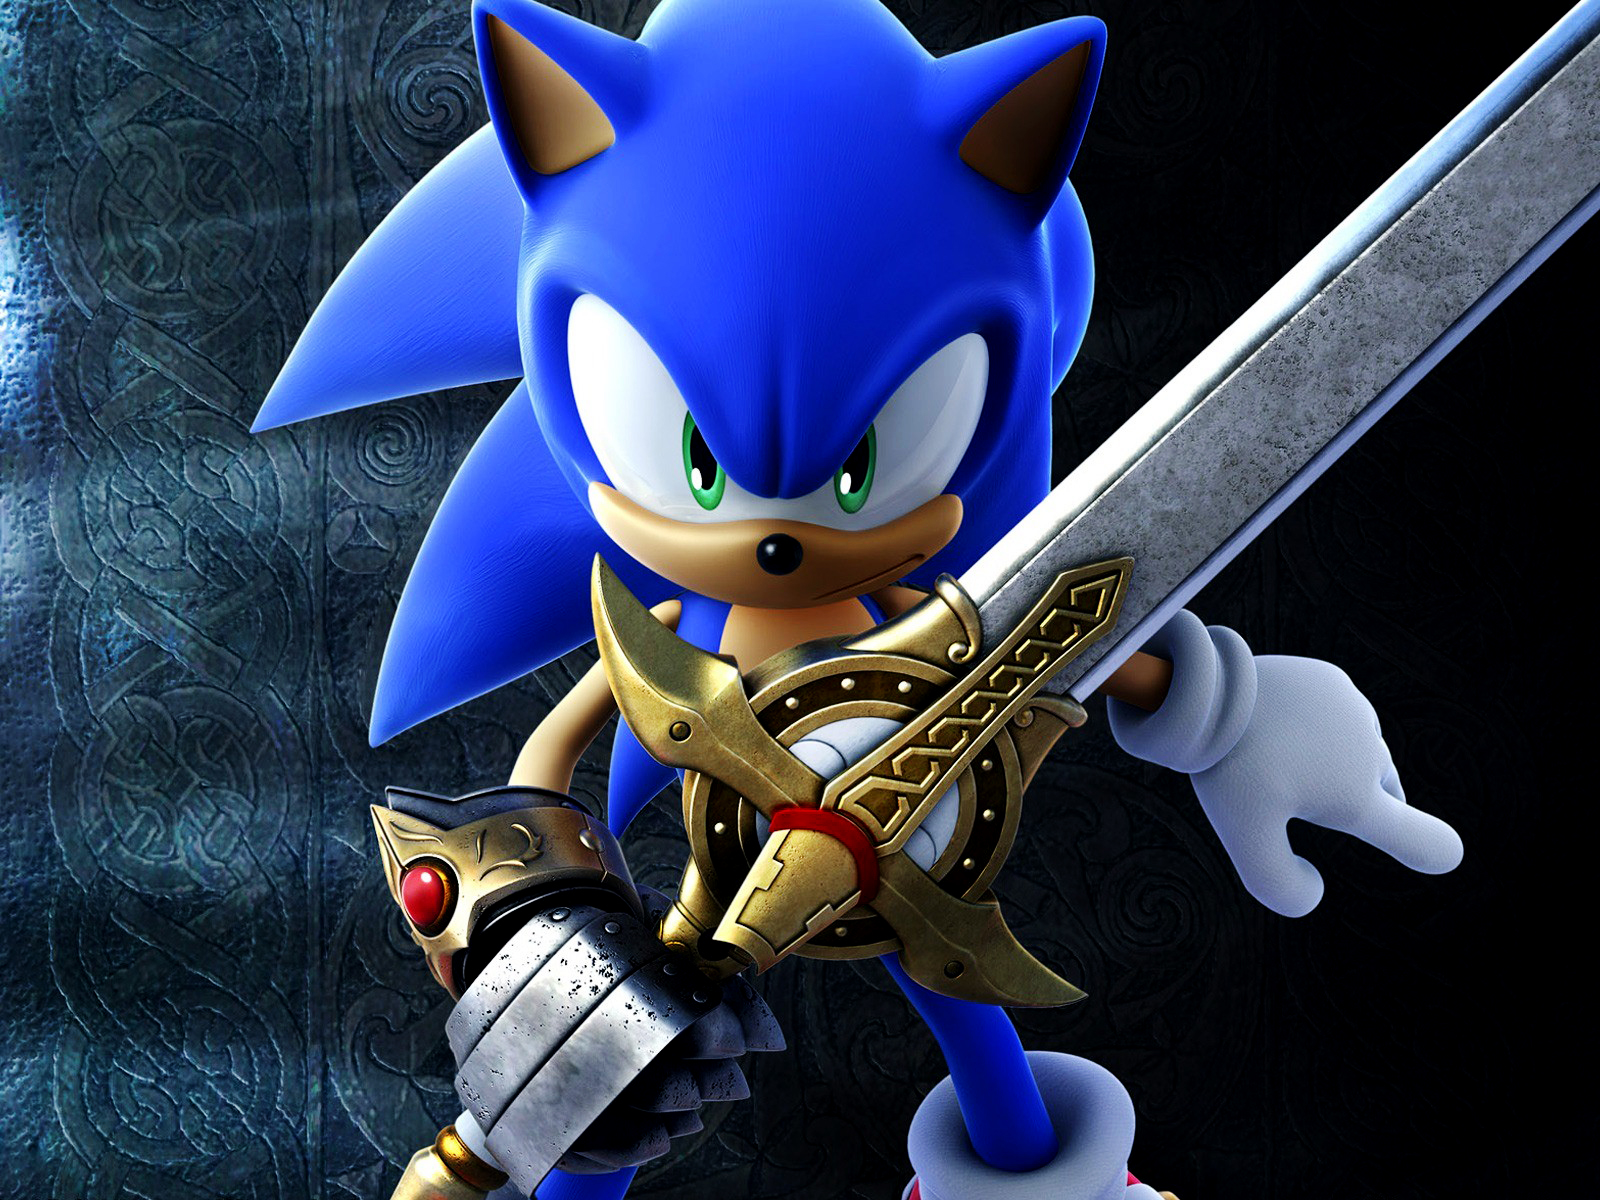 Sonic The Hedgehog HD Wallpapers Wallpapers, Backgrounds, Images